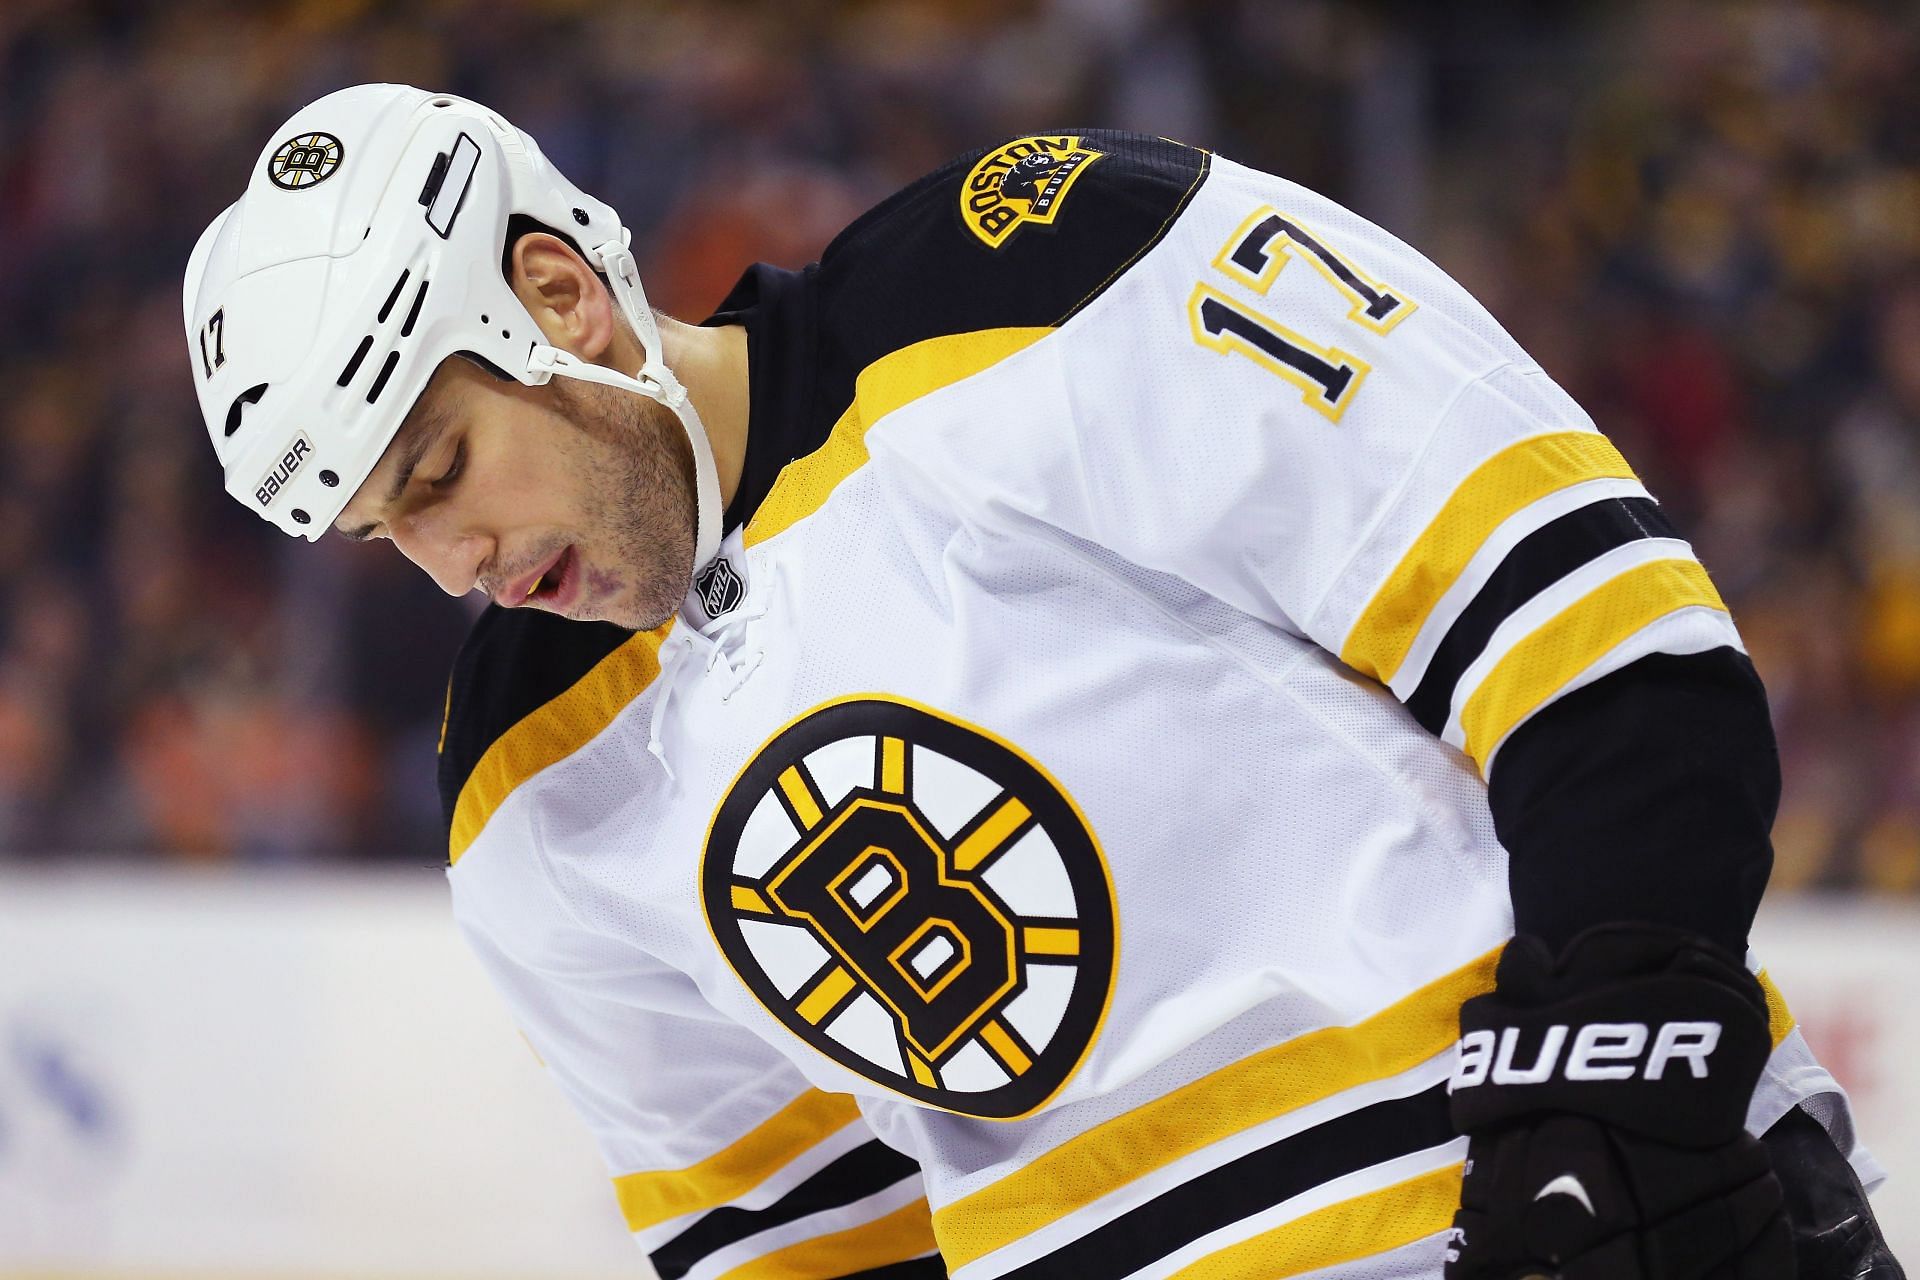 Fan favorite, Stanley Cup champ Lucic to rejoin Bruins, sources say